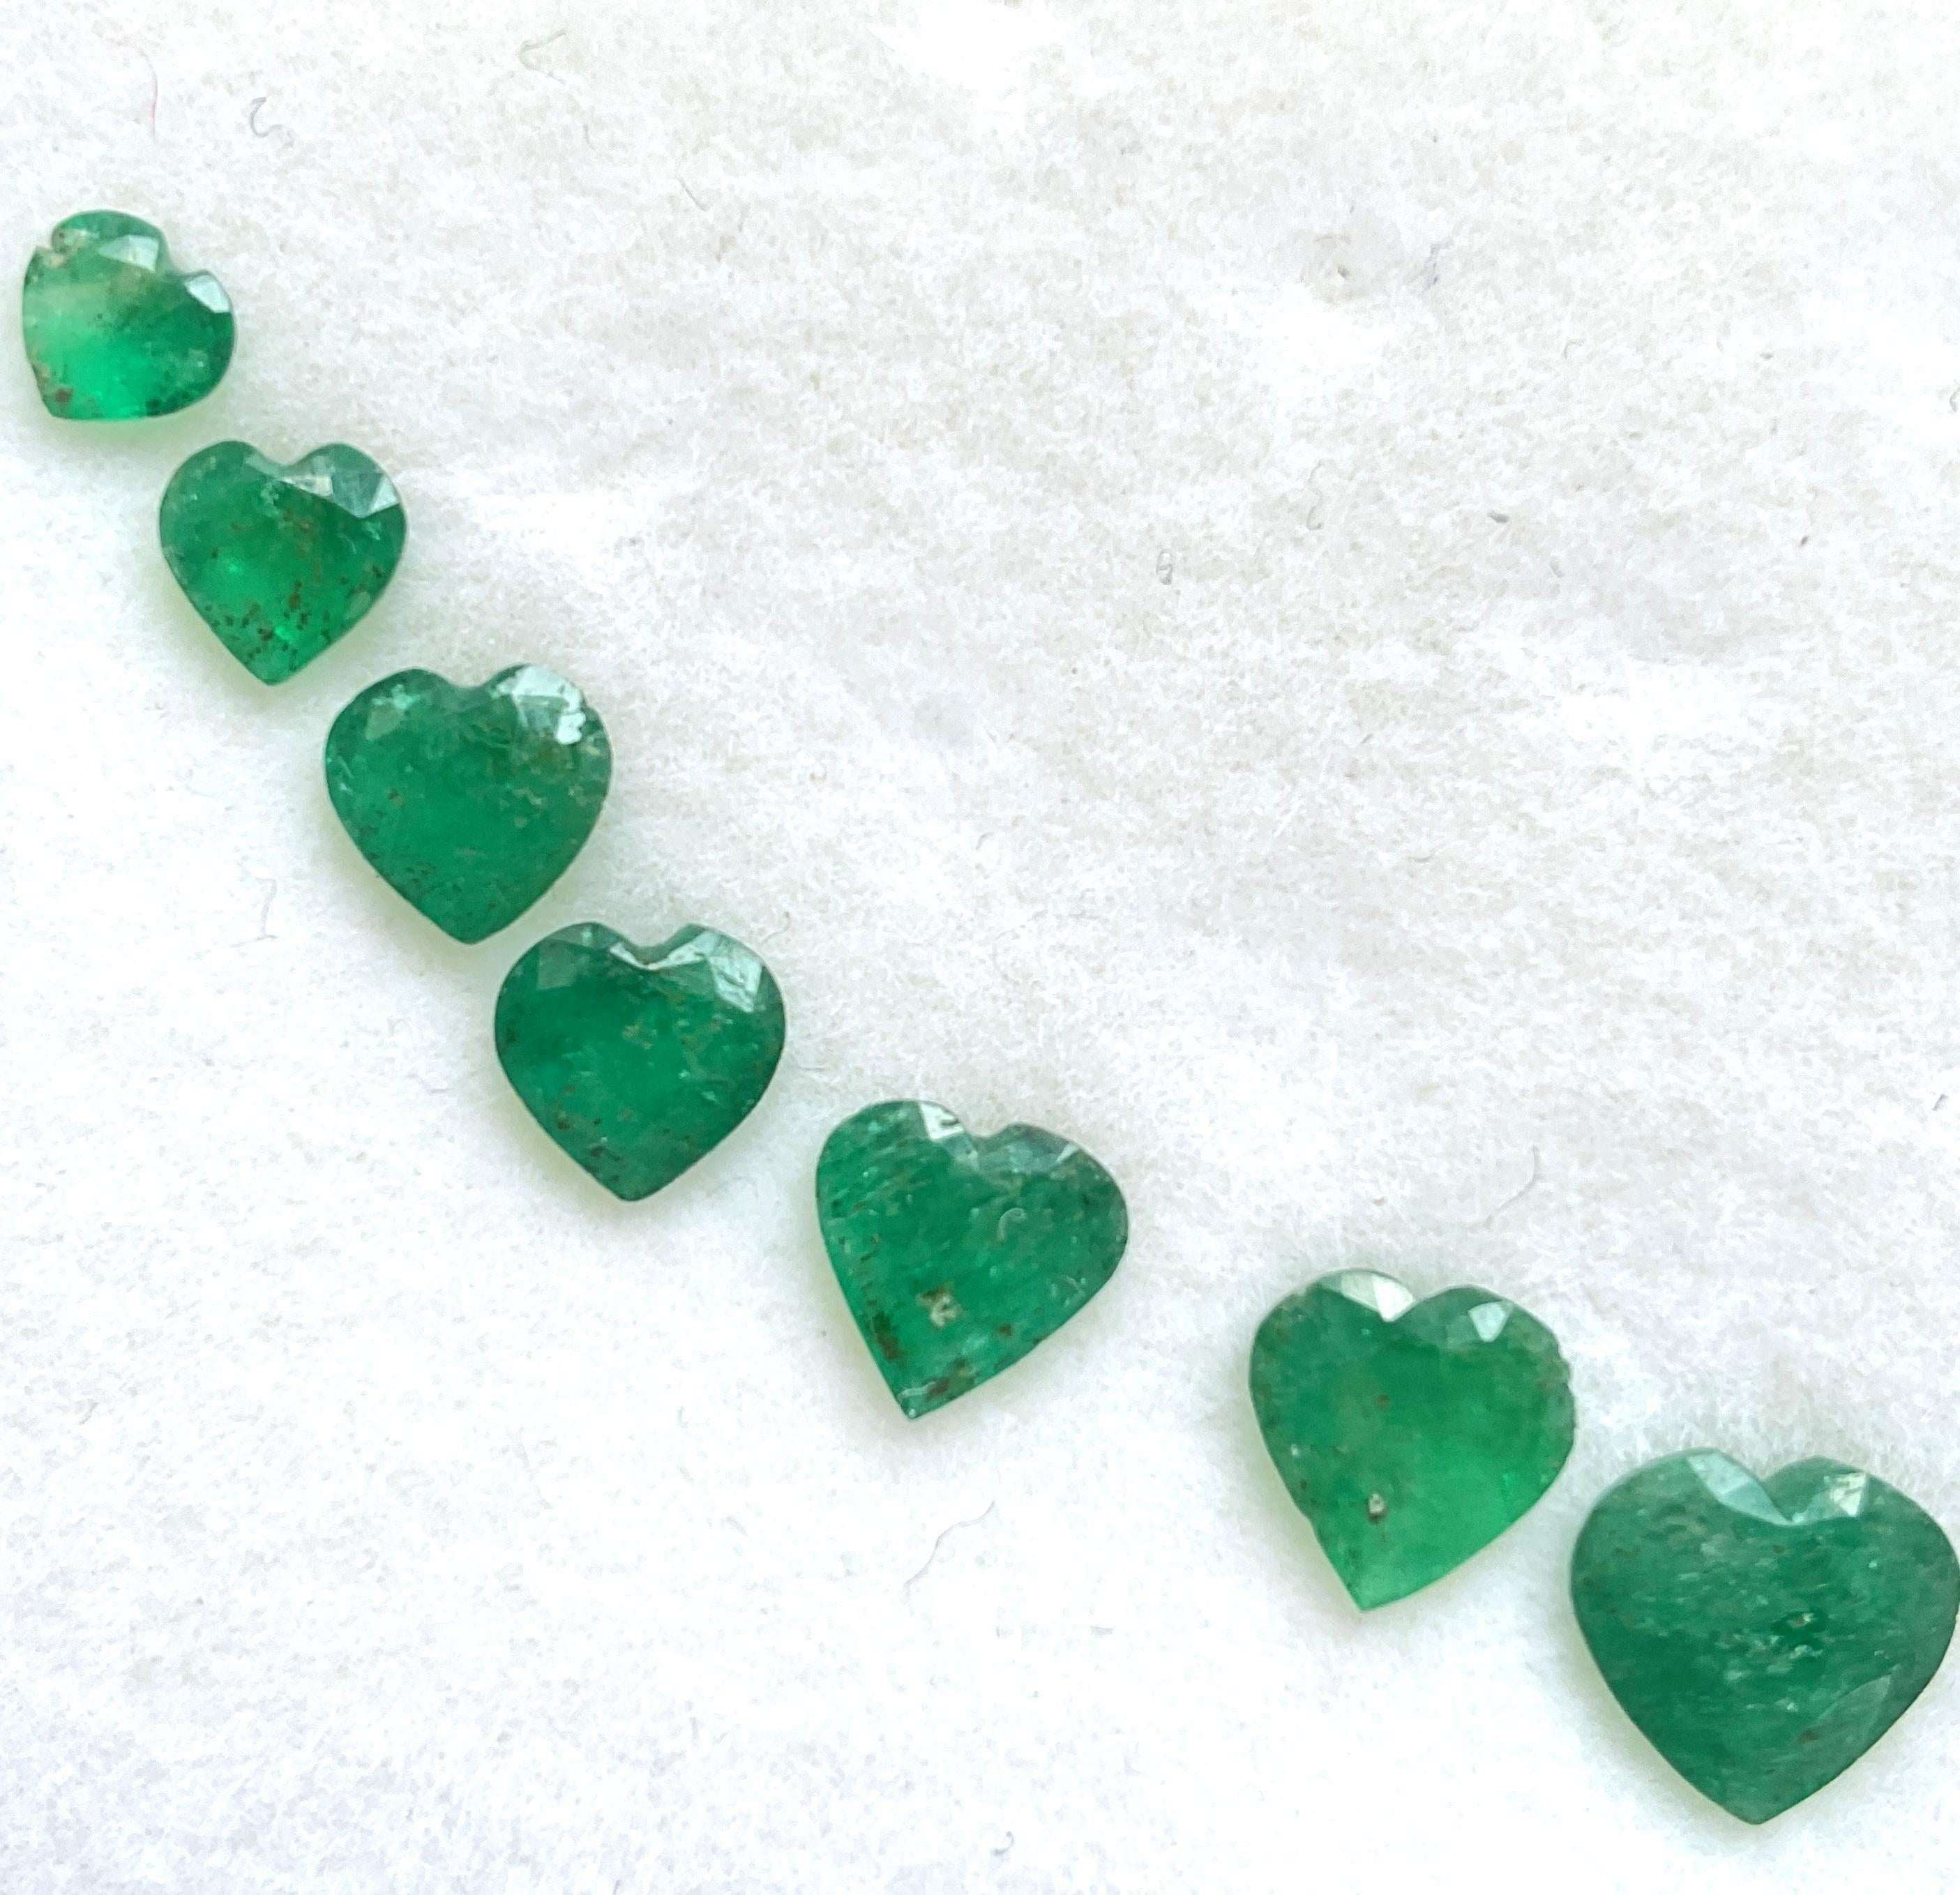 Heart Cut Colombian Emerald Heart Layout 7.65 Carats Cutstone For Jewellery Natural Gems For Sale